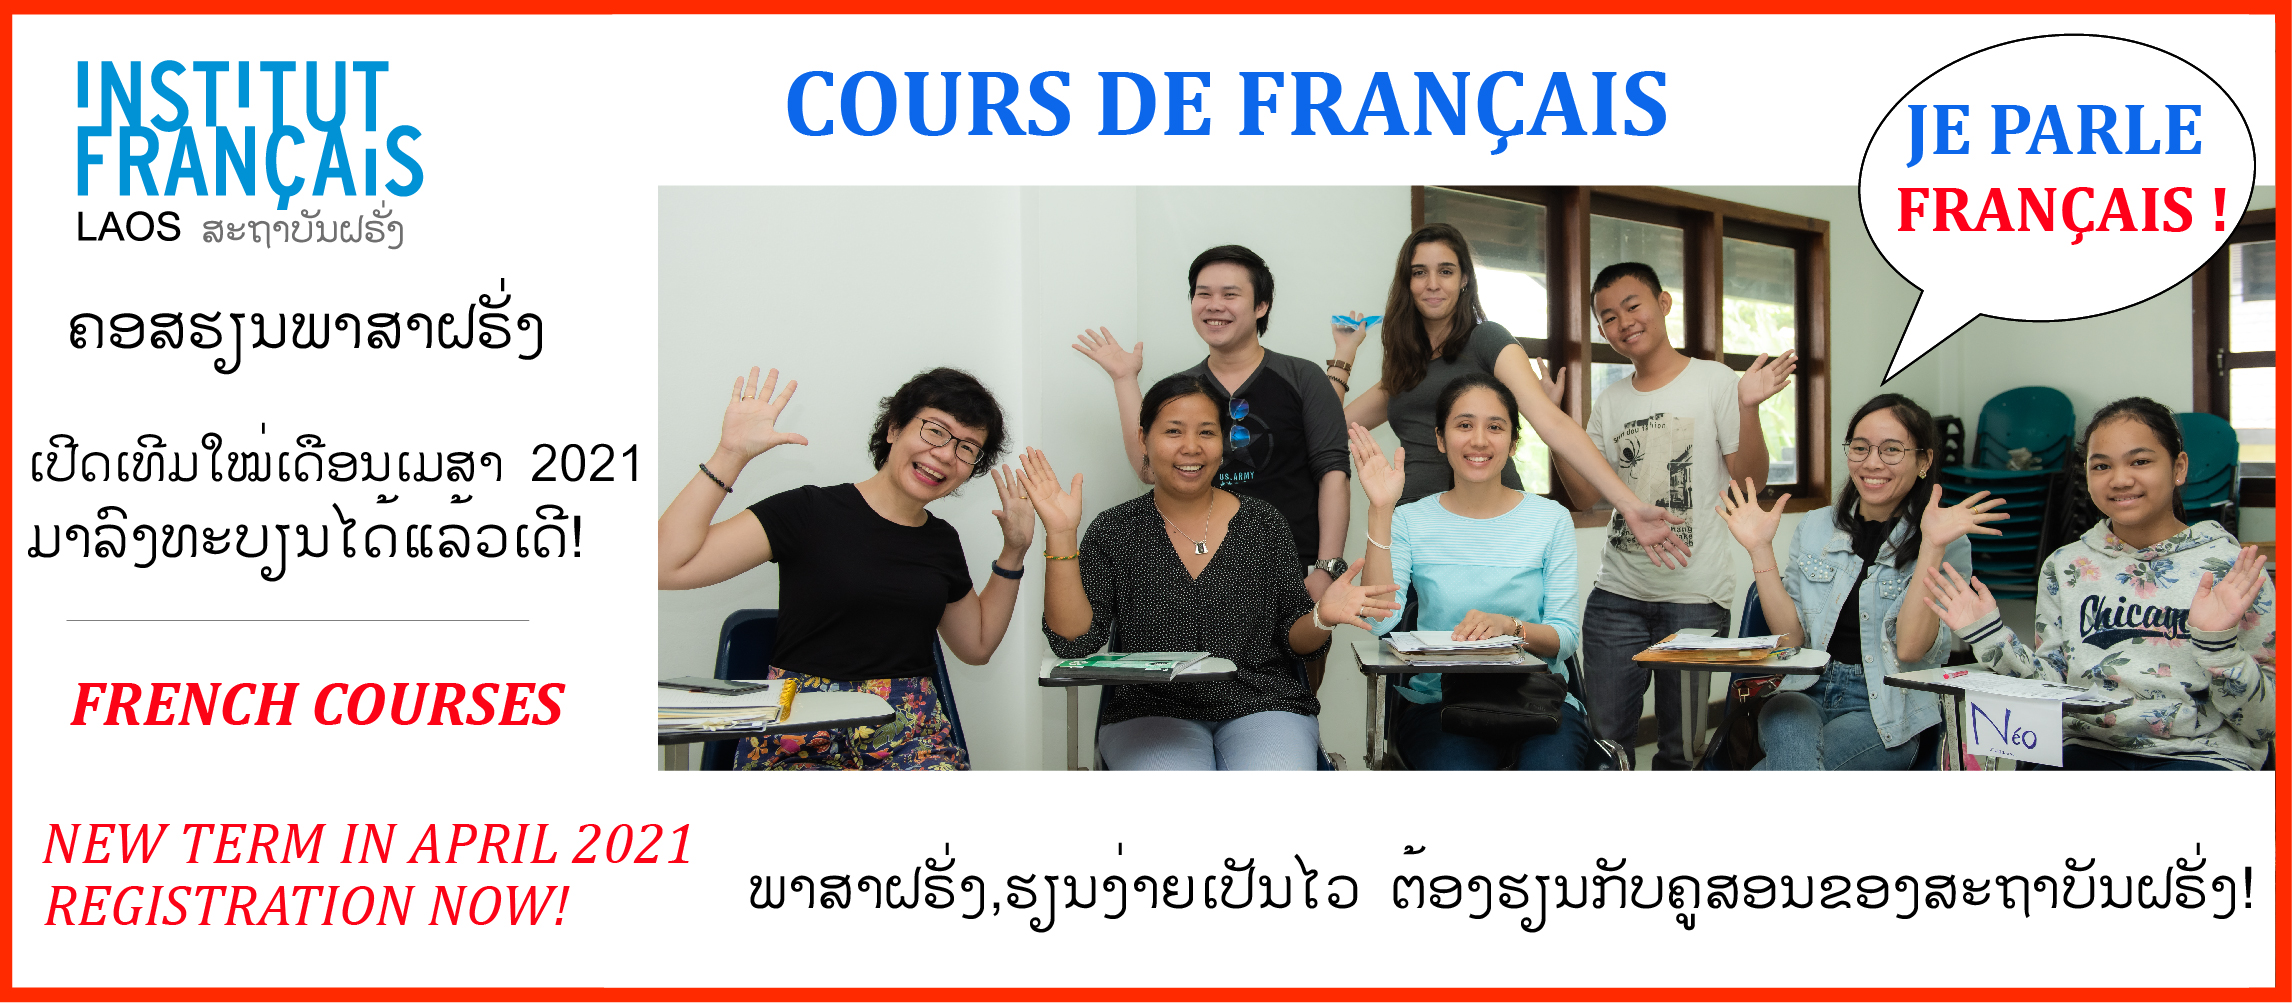 FRENCH COURSES – New Term